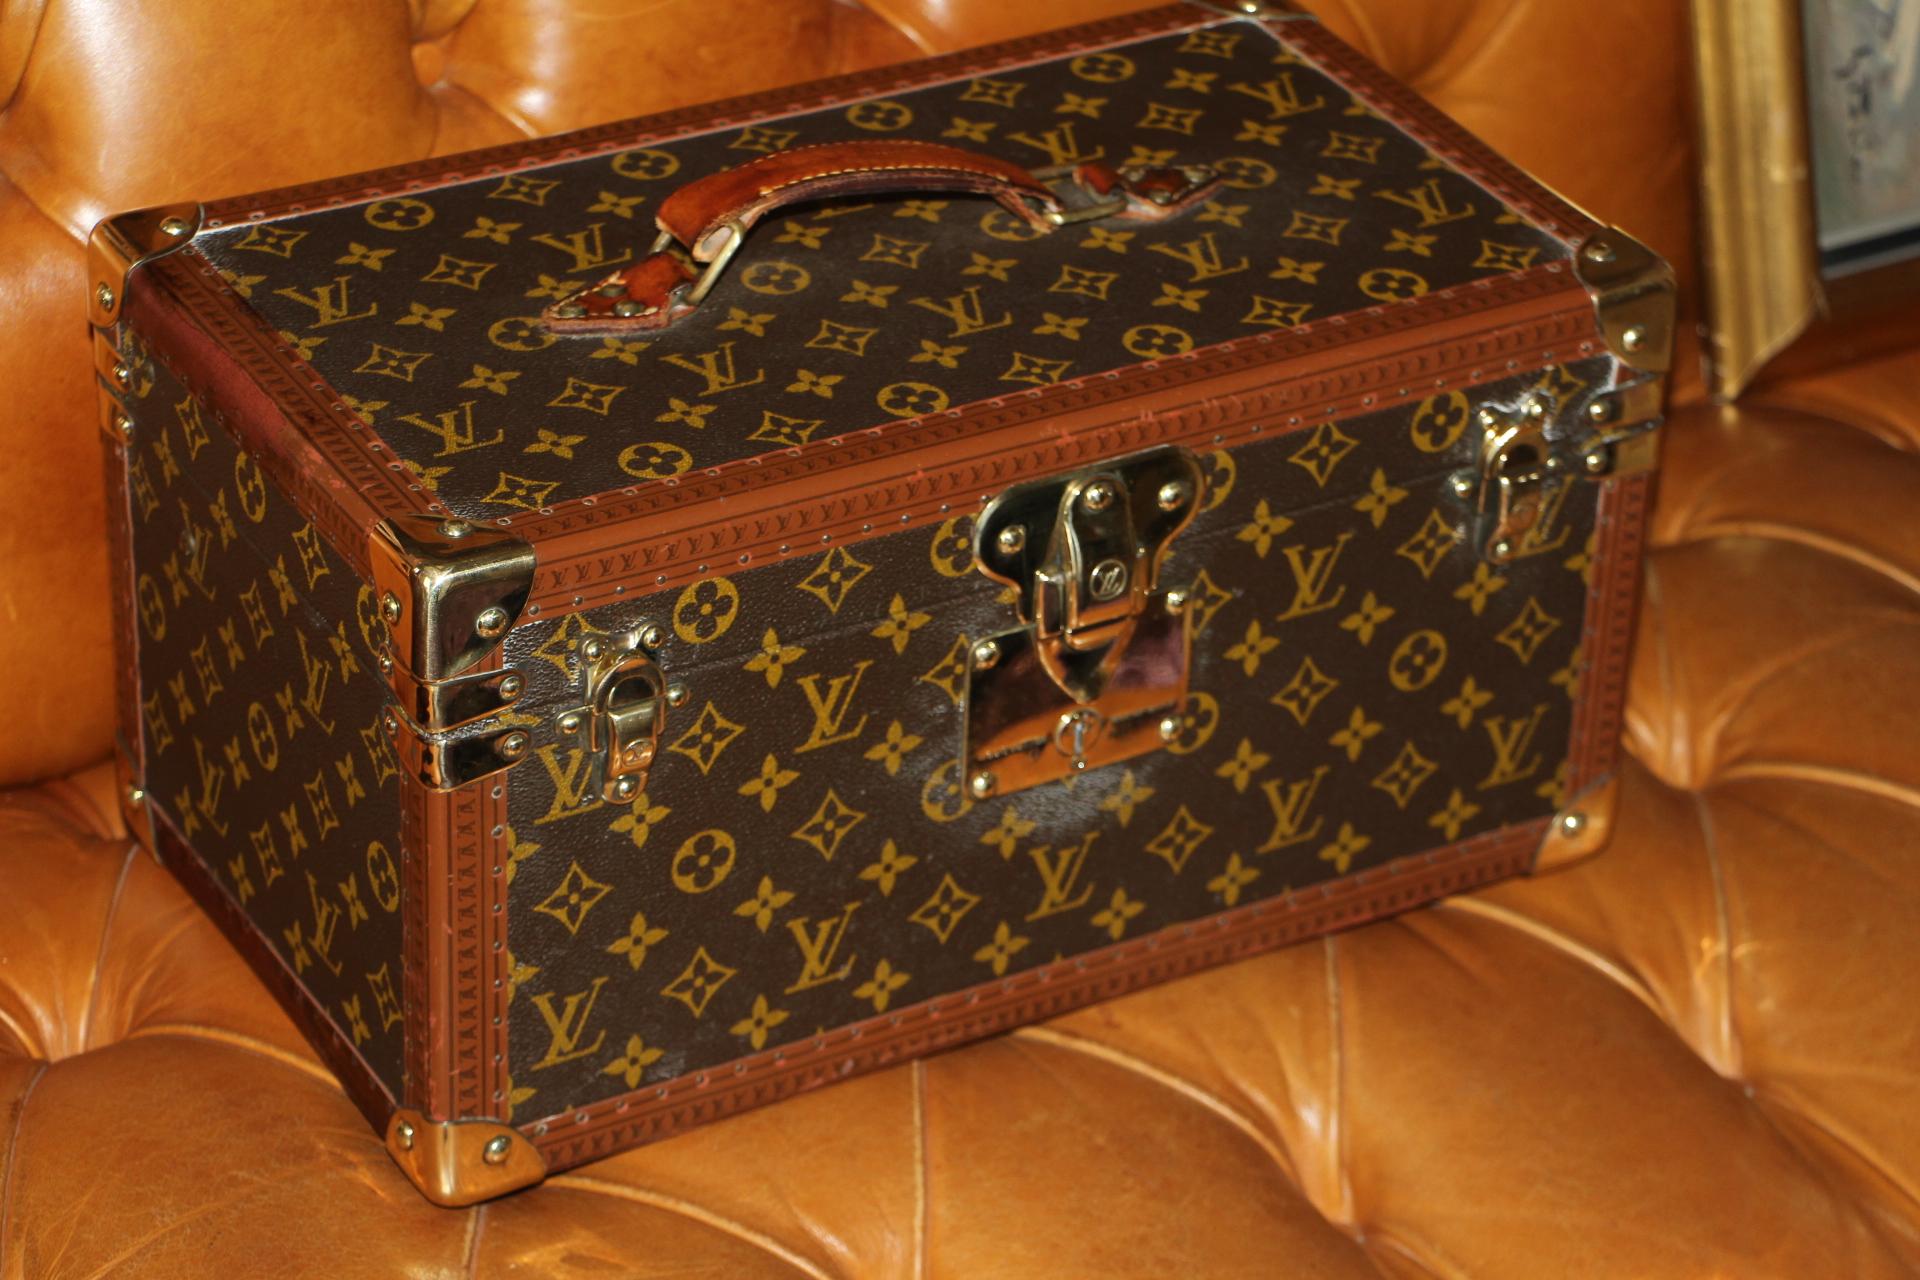 This beauty case features monogram canvas and all brass fittings. All studs are marked as well as its leather handle.
Interior: beige coated canvas, adjustable leather straps for holding materials. Very clean and fresh interior.
Louis Vuitton